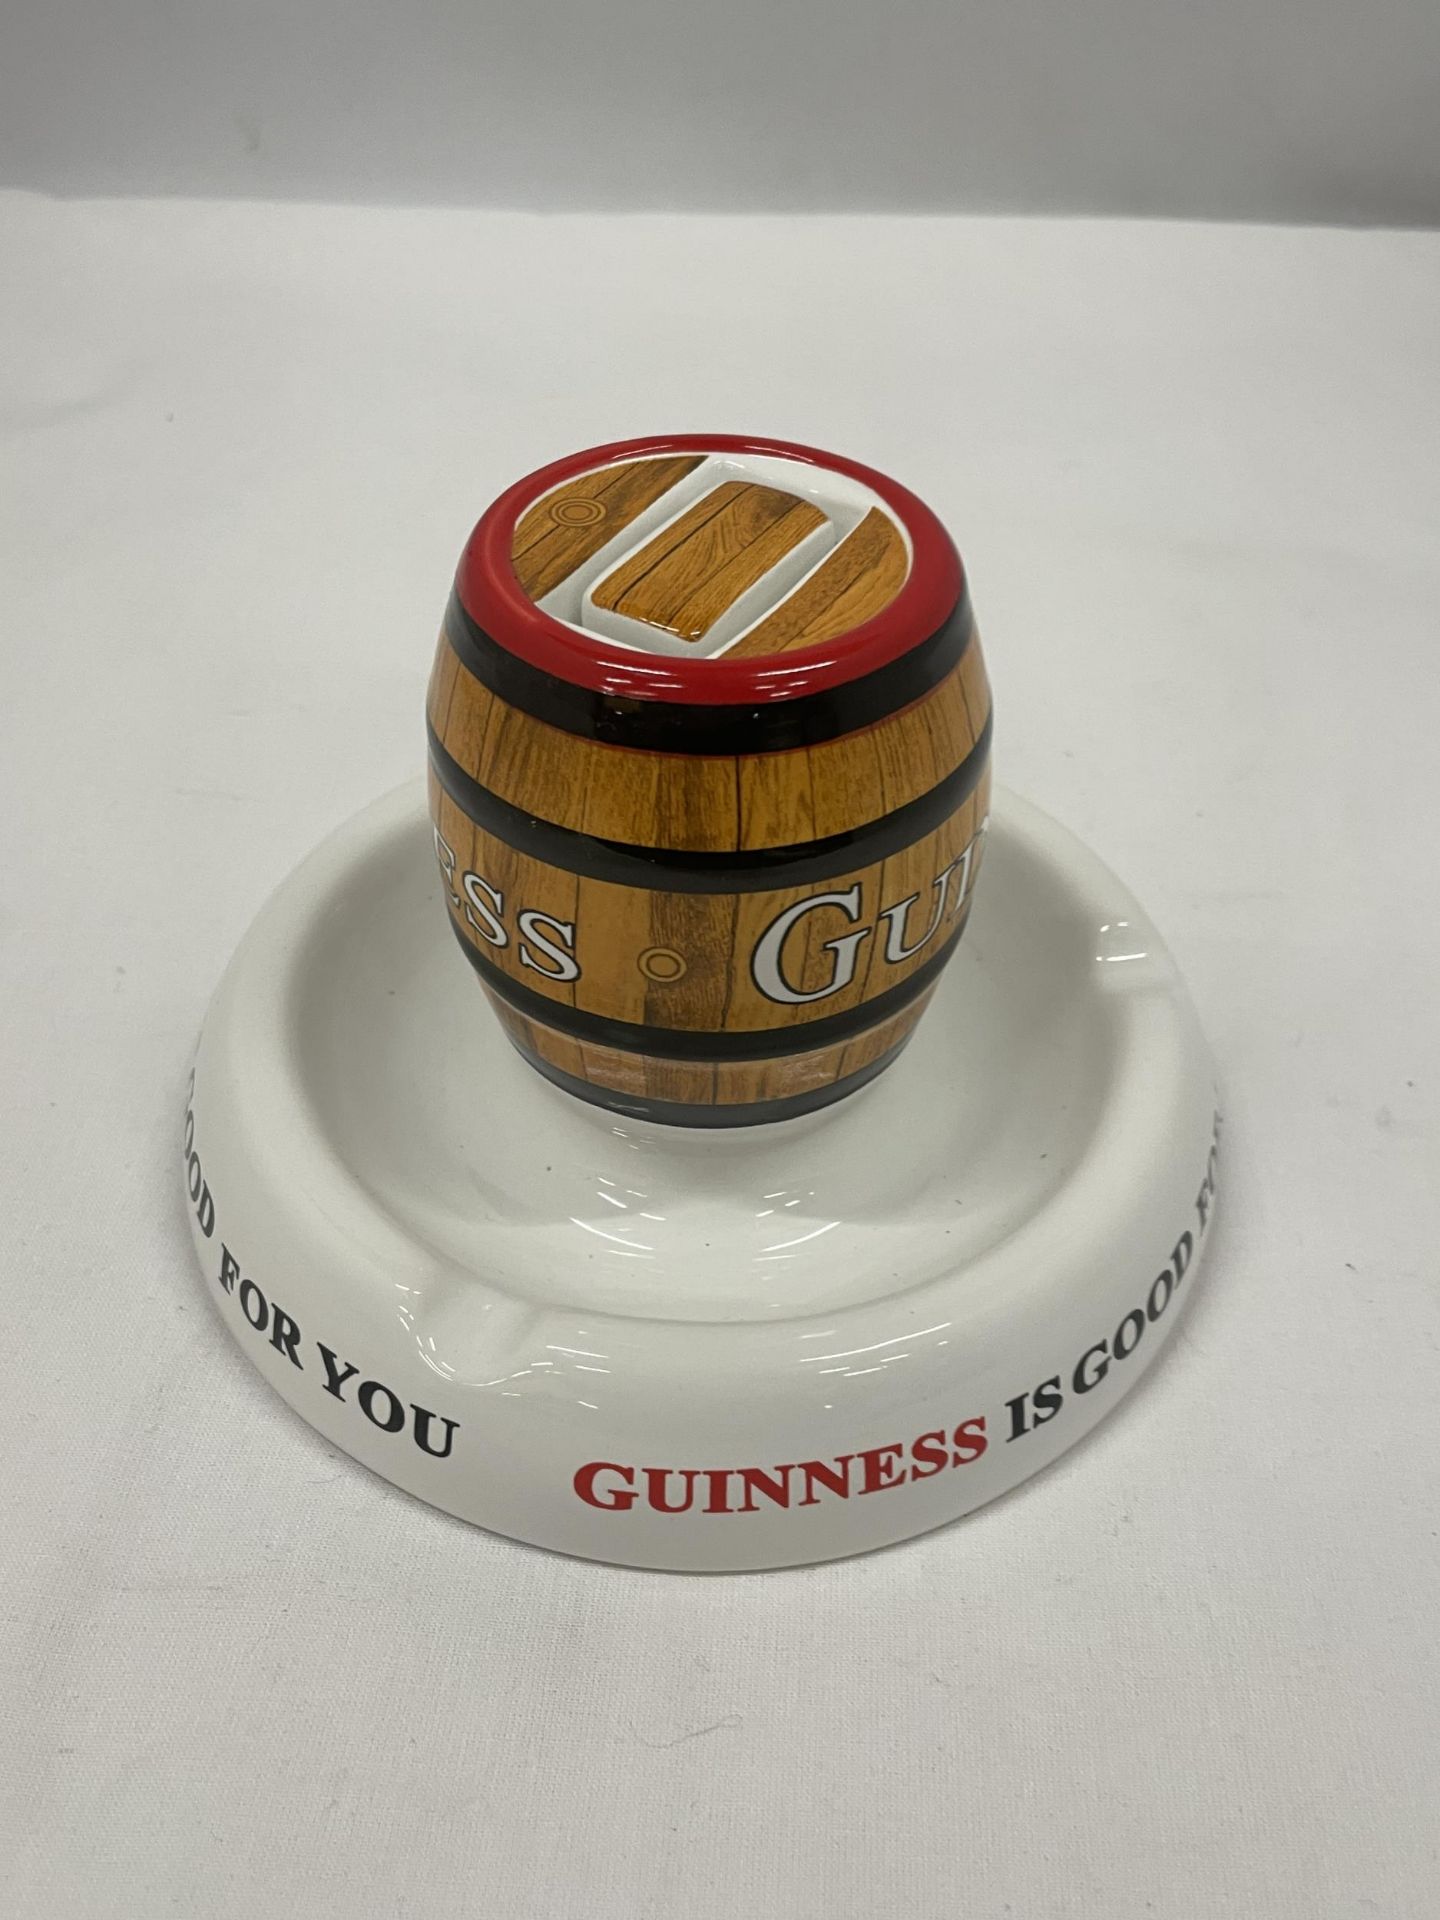 A MINTONS GUINNESS IS GOOD FOR YOU ASHTRAY / MATCHBOX HOLDER - Image 2 of 3